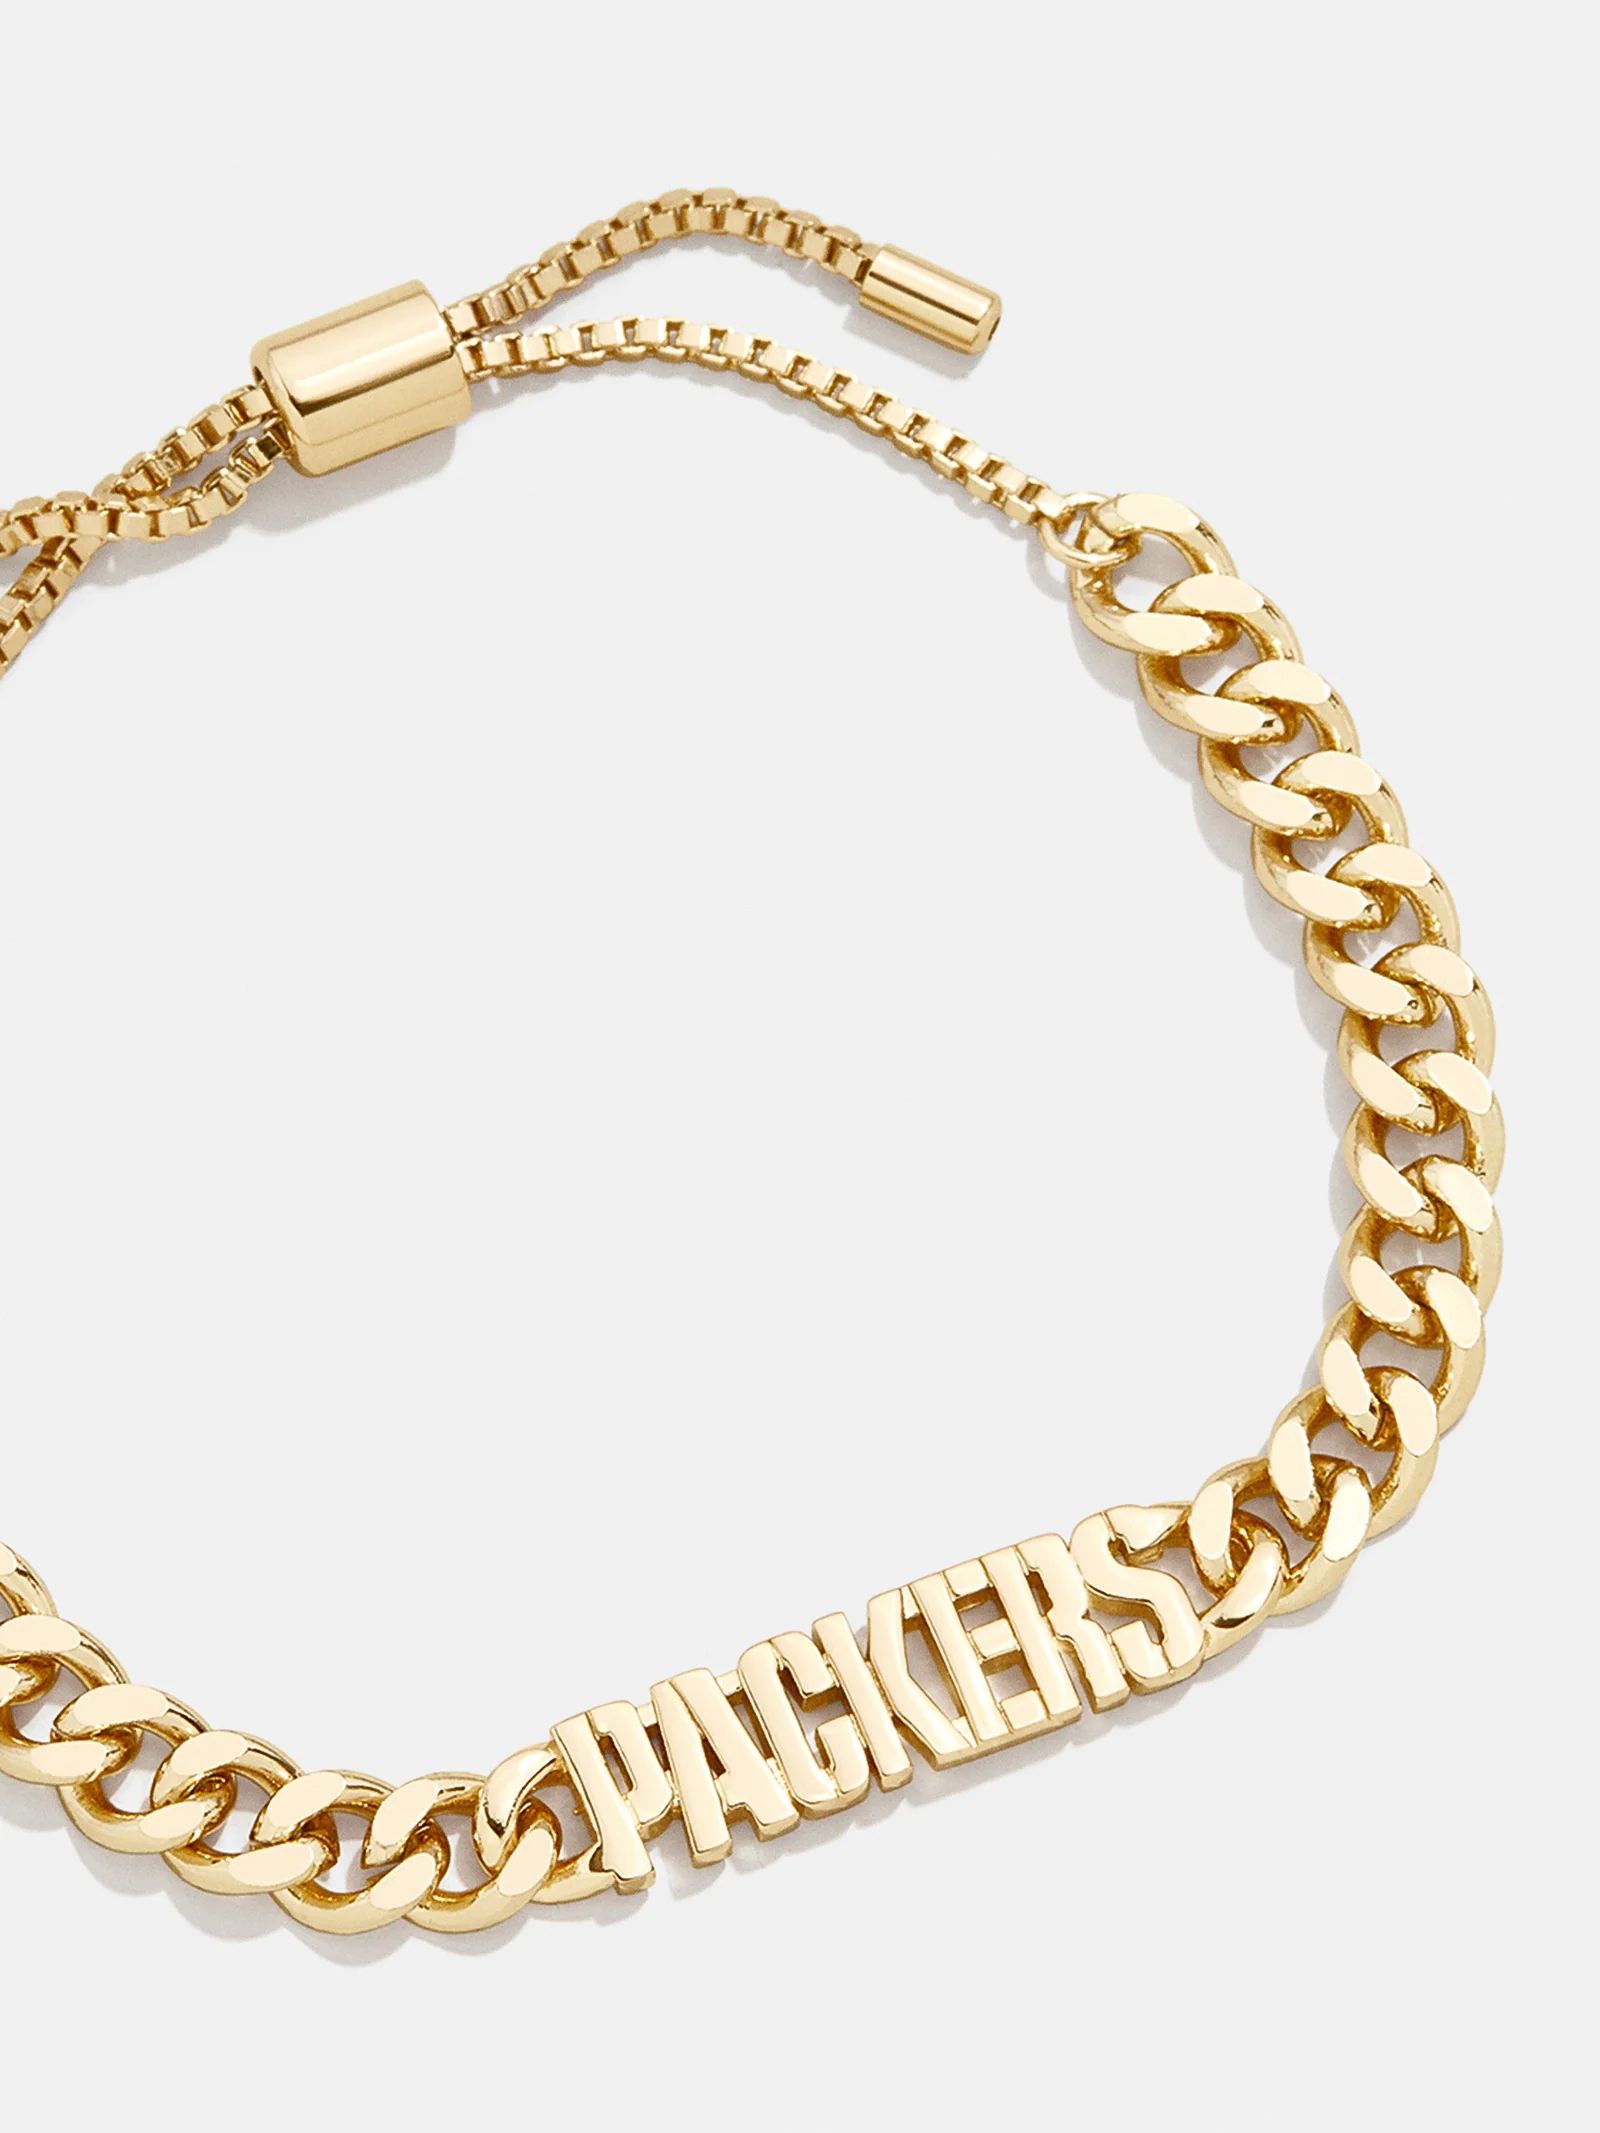 Green Bay Packers NFL Gold Curb Chain Bracelet - Green Bay Packers | BaubleBar (US)